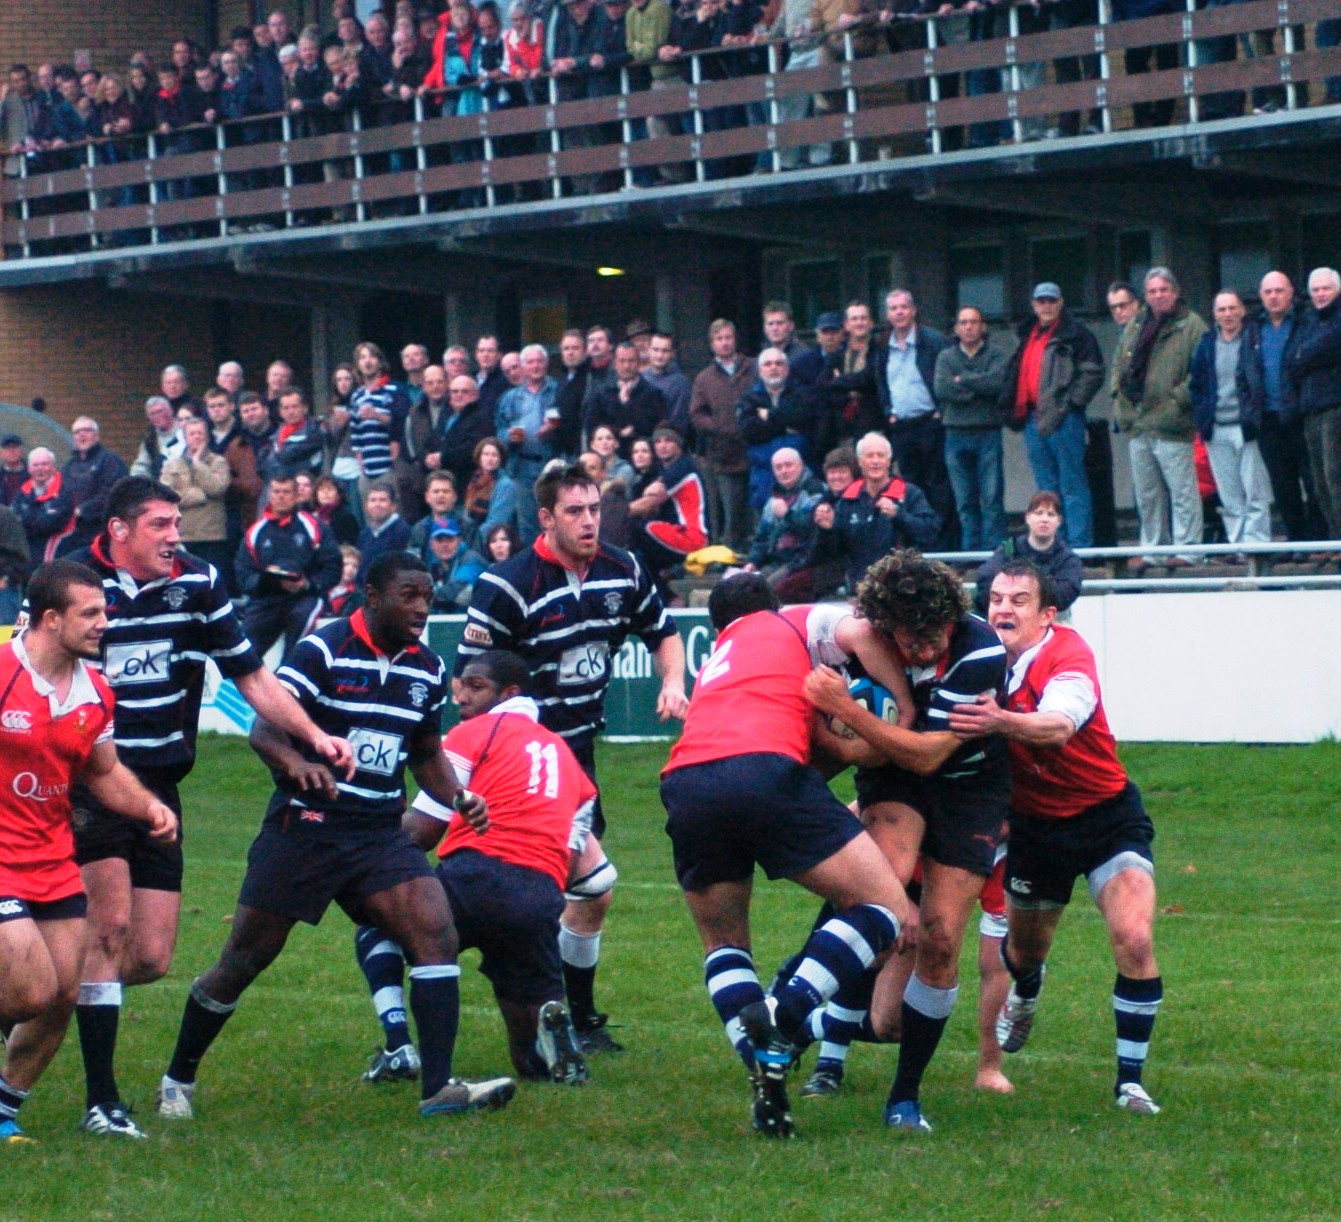 a team of men playing a game of rugby in front of a crowd